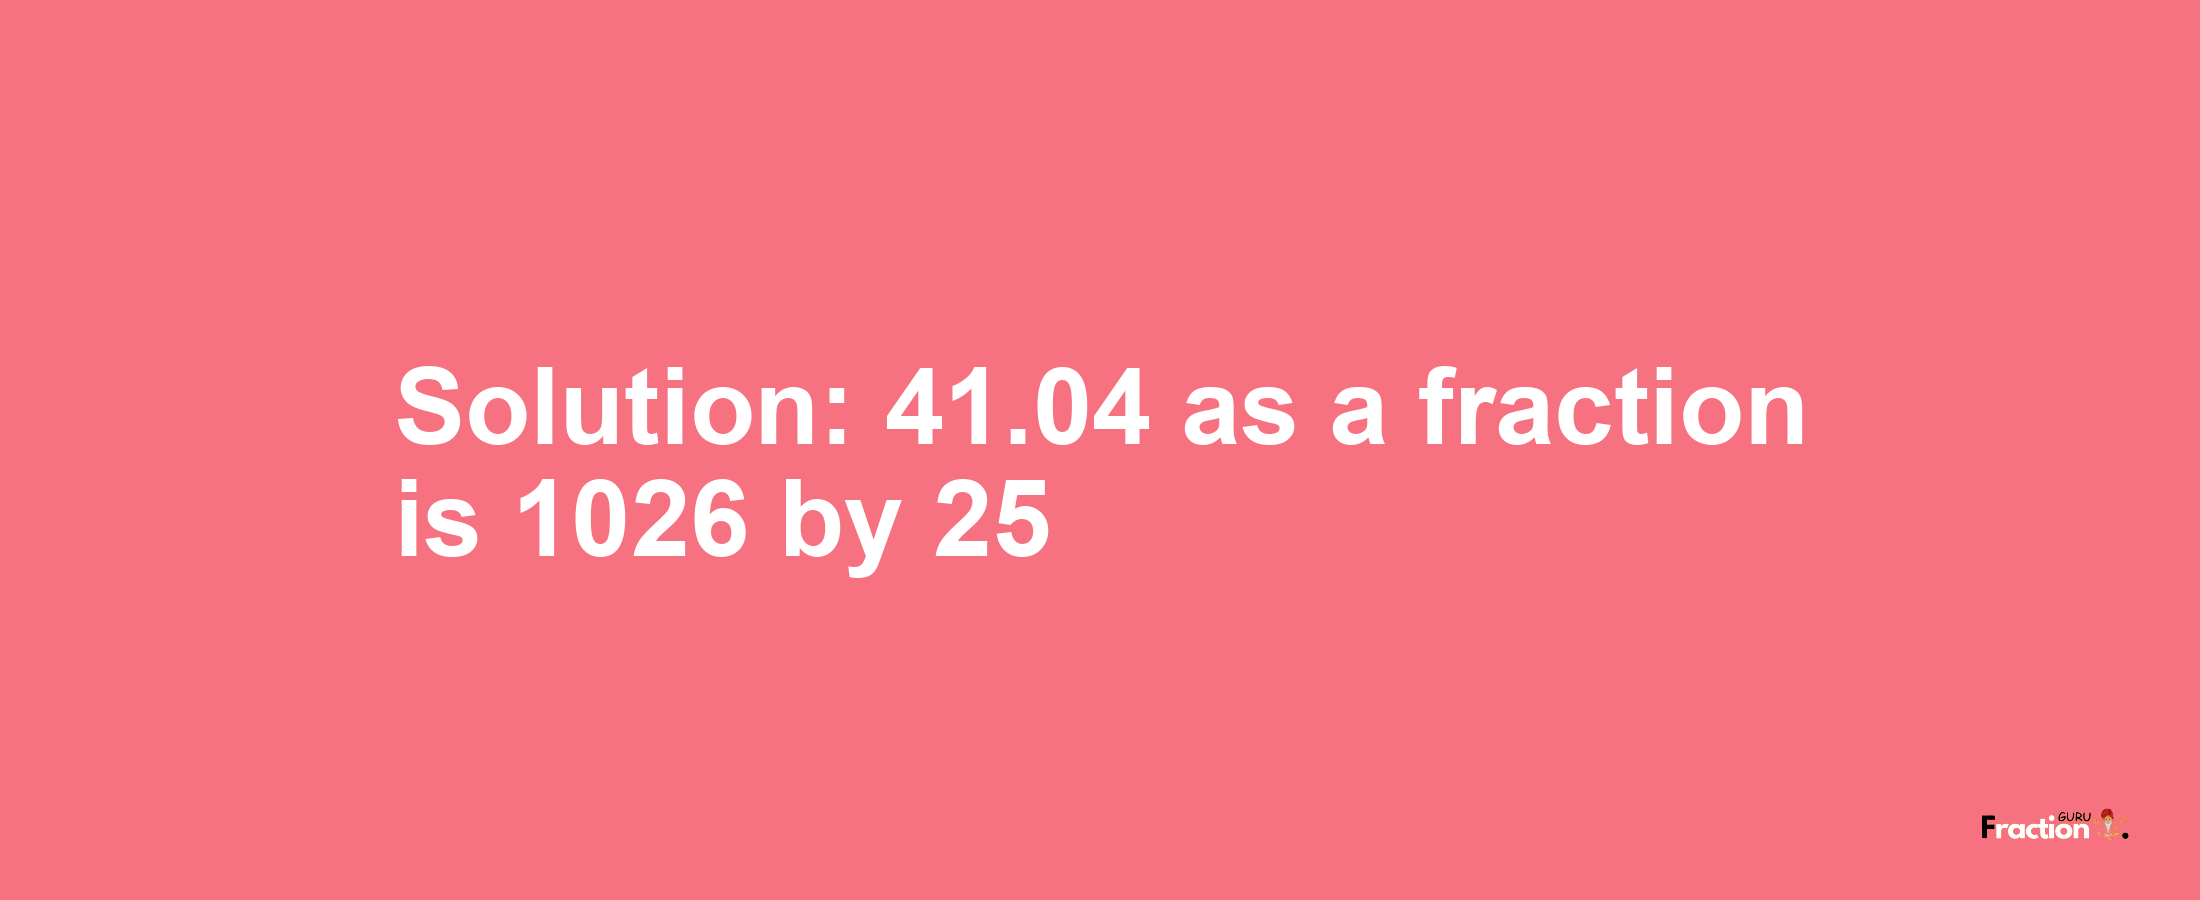 Solution:41.04 as a fraction is 1026/25